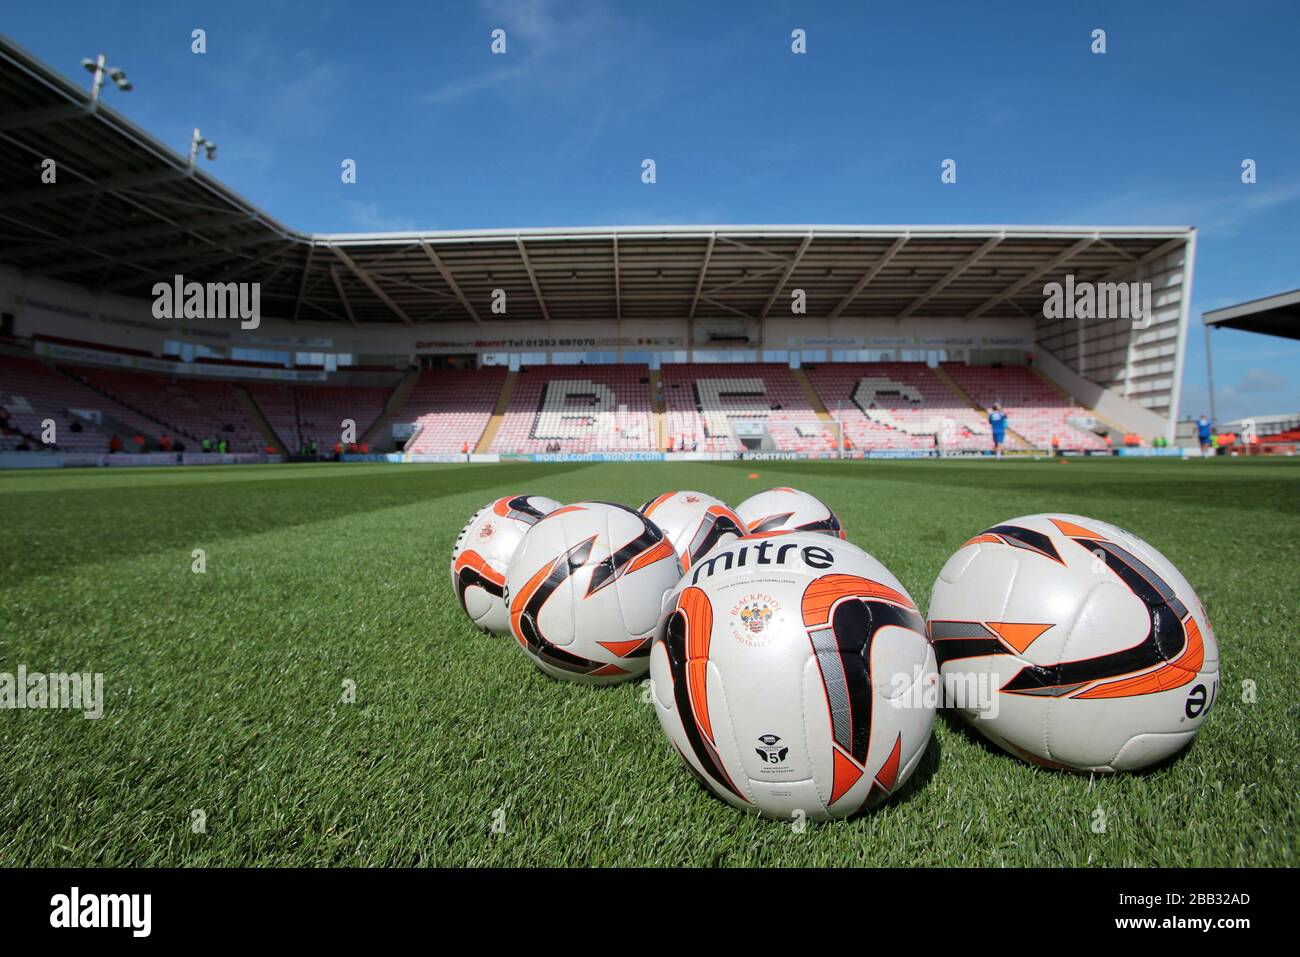 General view of Bloomfield Road, home to Blackpool Football Club. Stock Photo